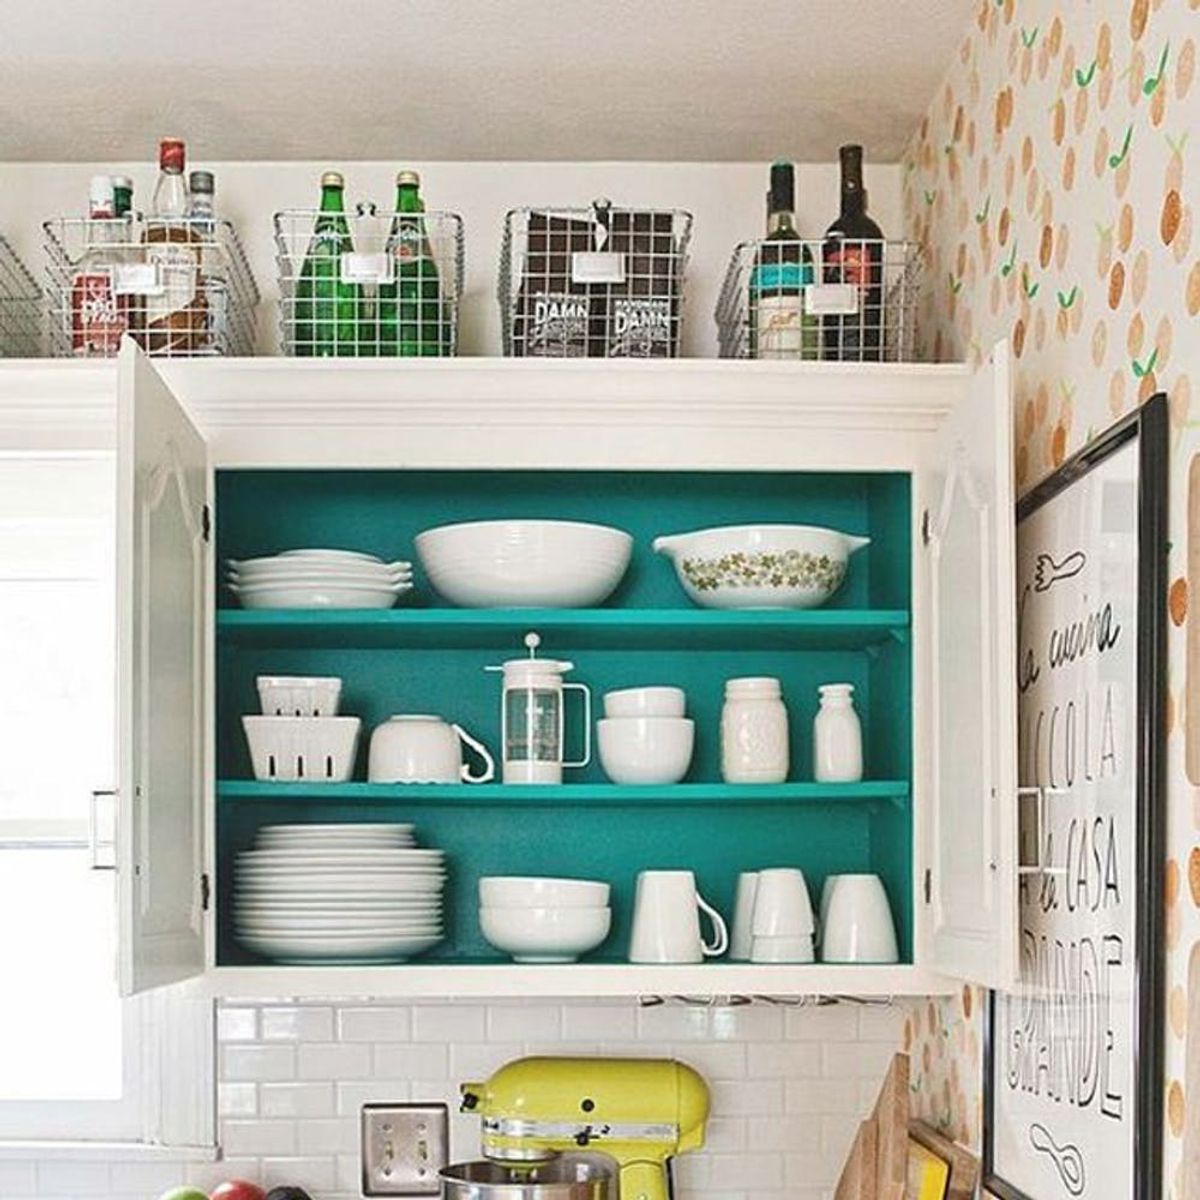 10 Genius Ways to Use That Awkward Space Above Your Kitchen Cabinets